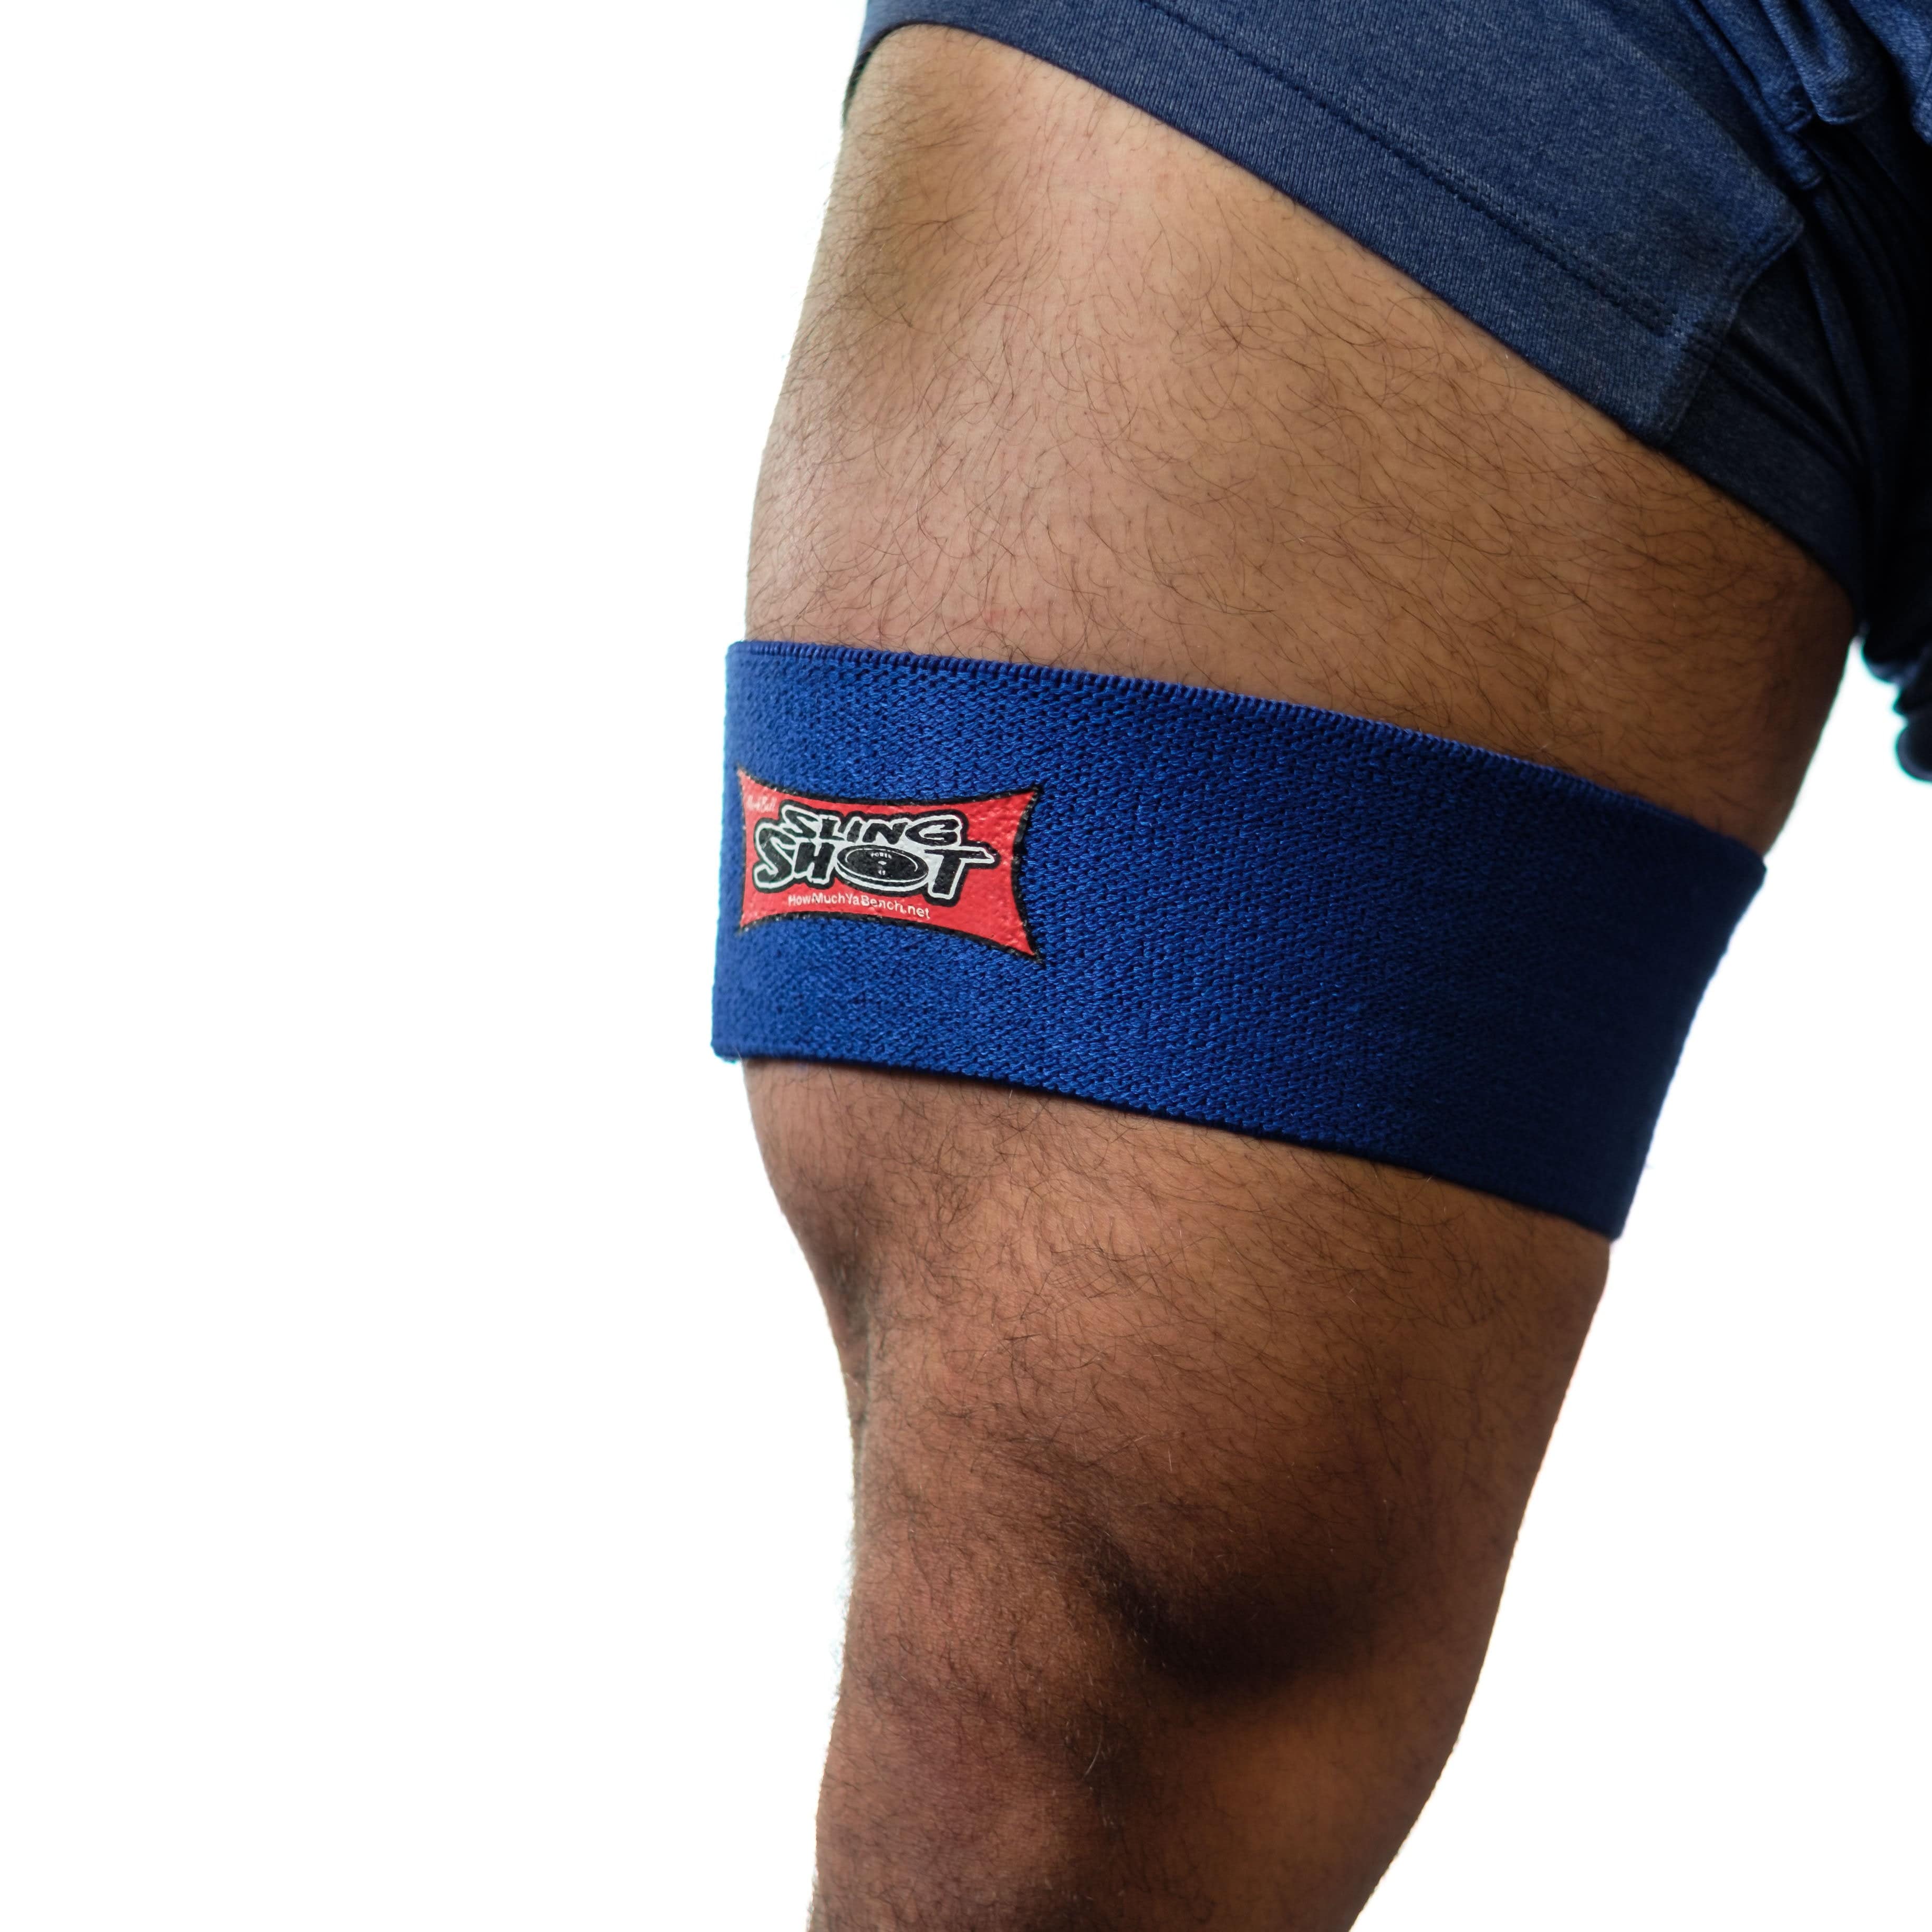 Sling Shot | Hammy Band - Blue - XTC Fitness - Exercise Equipment Superstore - Canada - Compression Cuffs